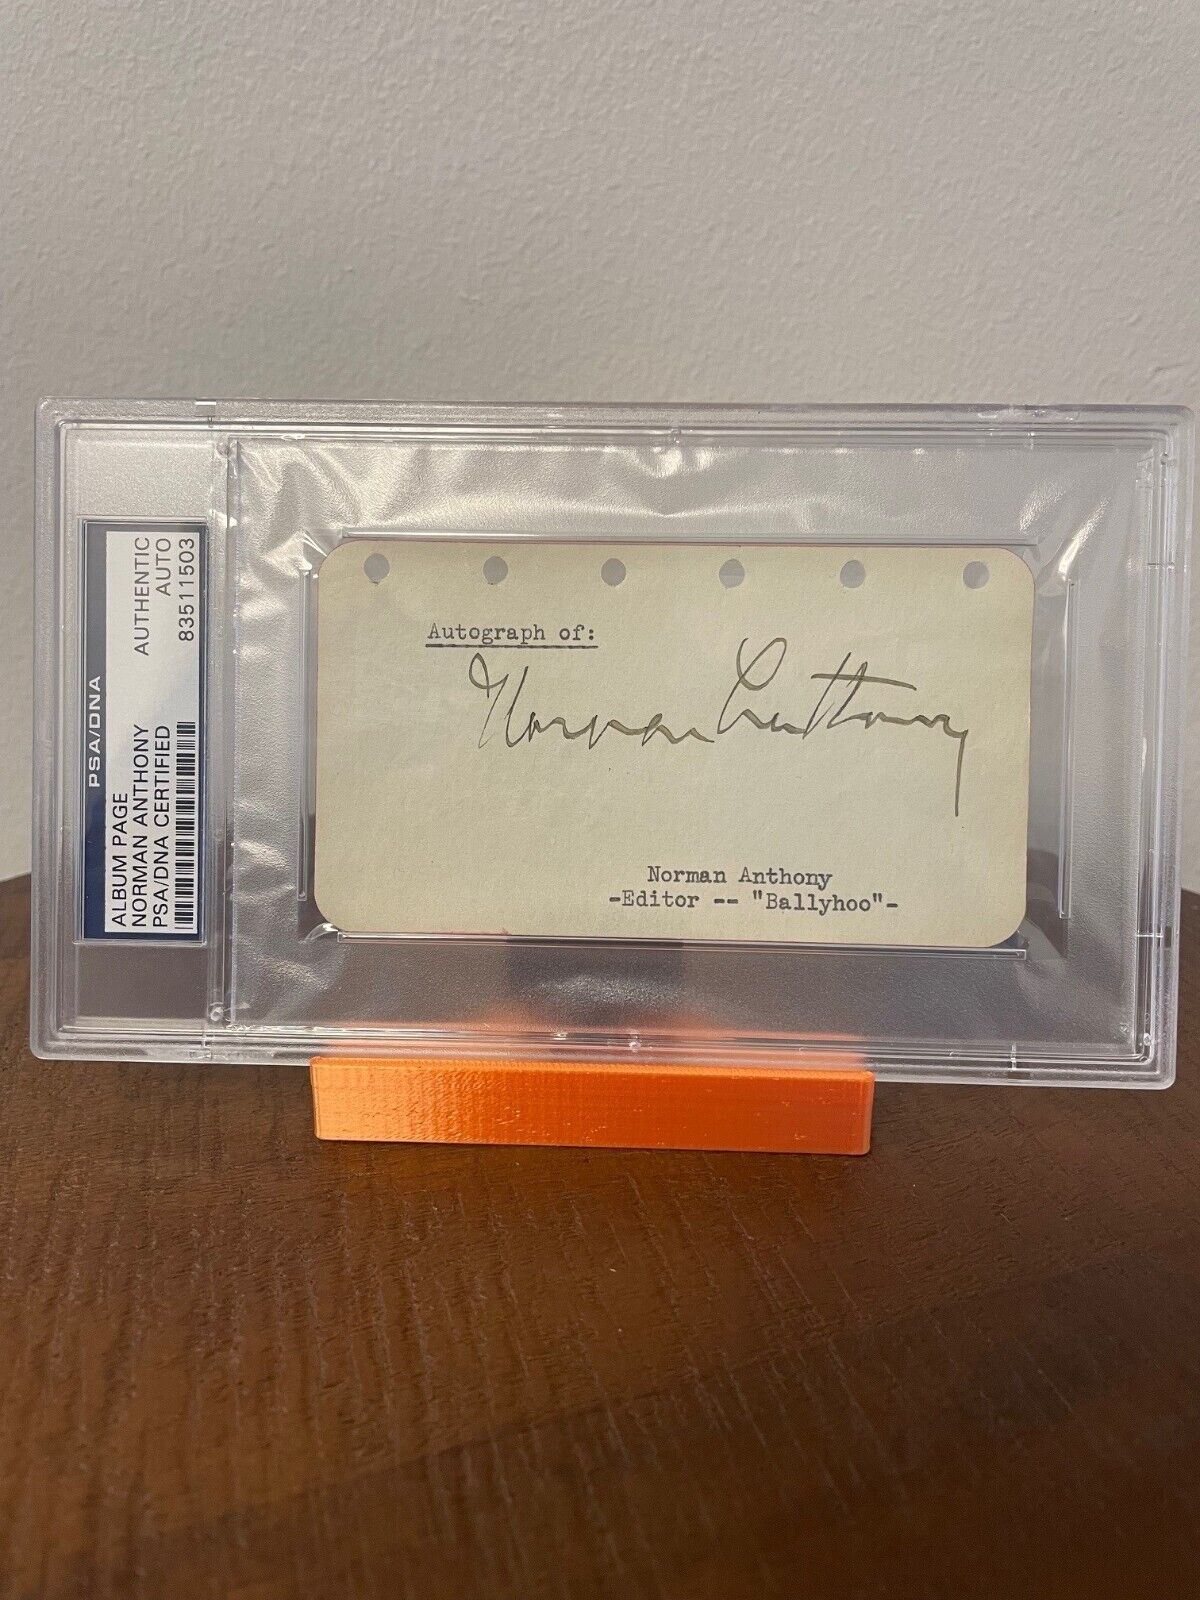 NORMAN ANTHONY - SIGNED AUTOGRAPHED ALBUM PAGE - PSA/DNA SLABBED & CERTIFIED